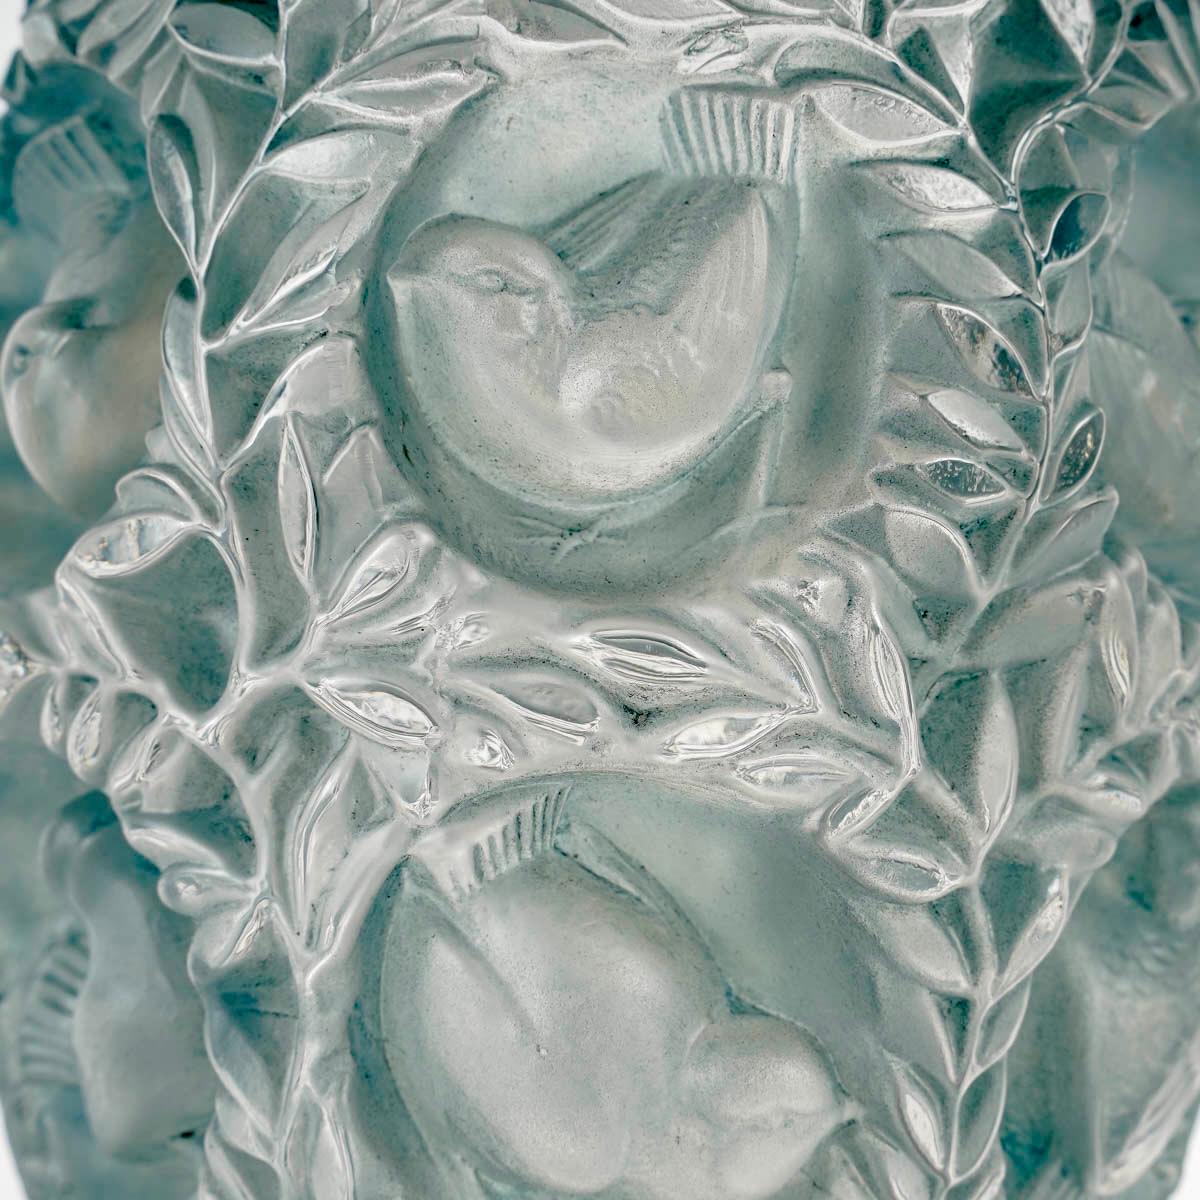 Molded 1939 Rene Lalique - Vase Bagatelle Frosted Glass with Blue Patina